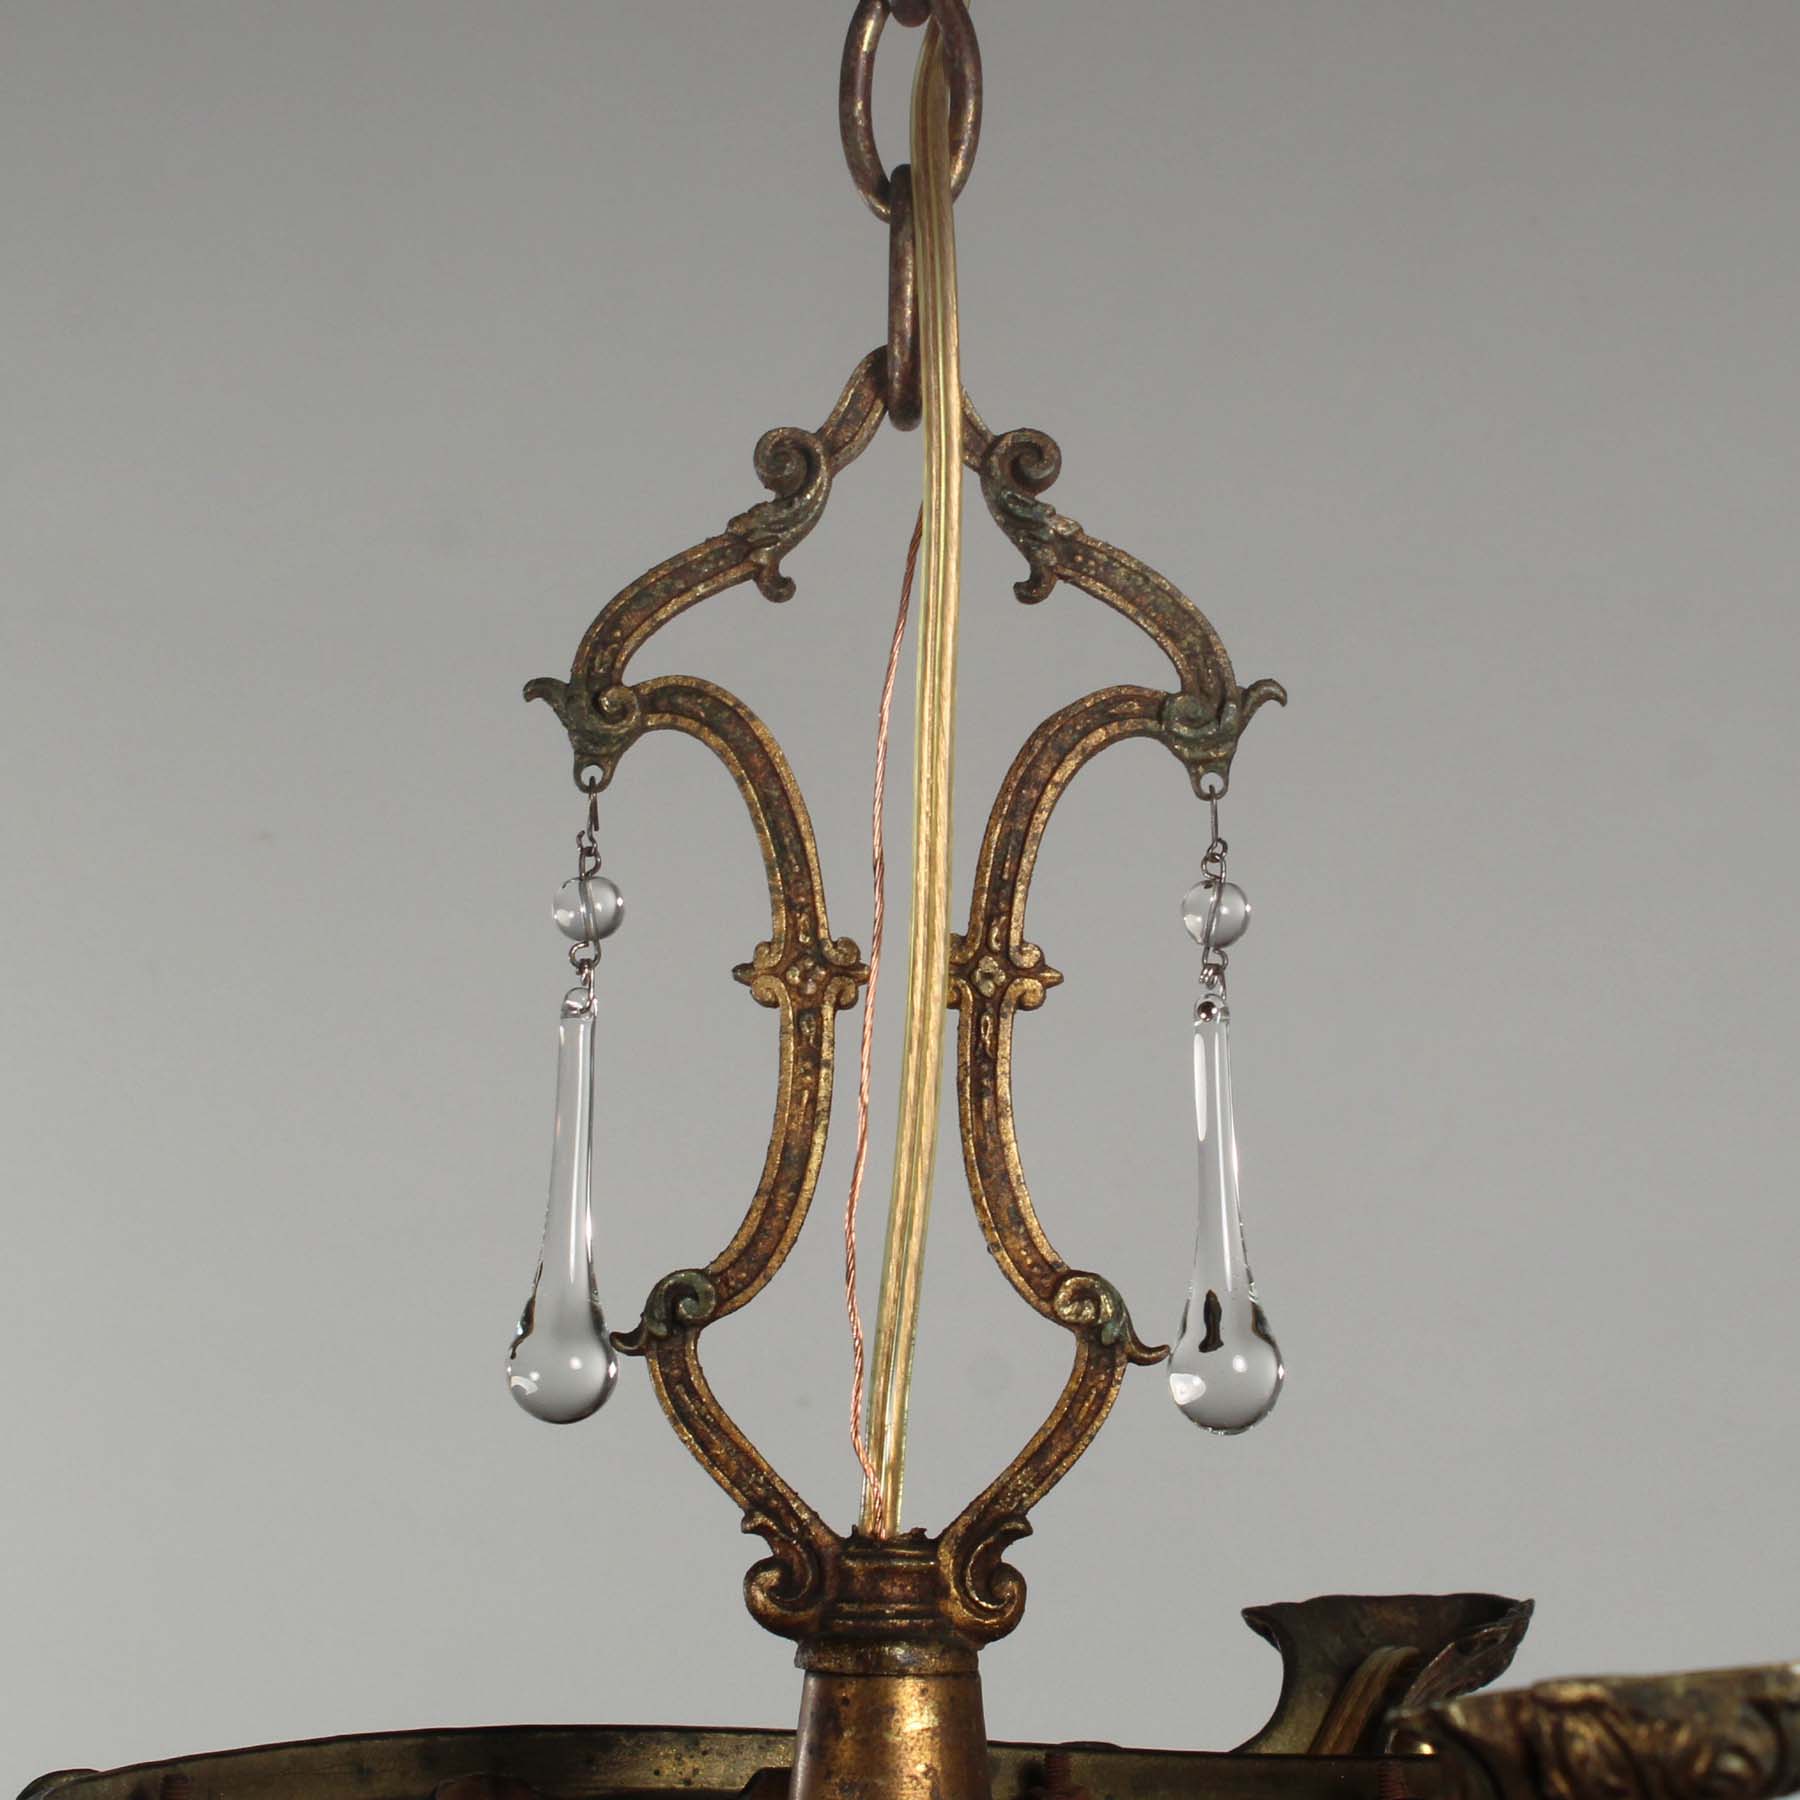 SOLD Antique Chandelier with Unusual Prisms, Early 1900s-67413